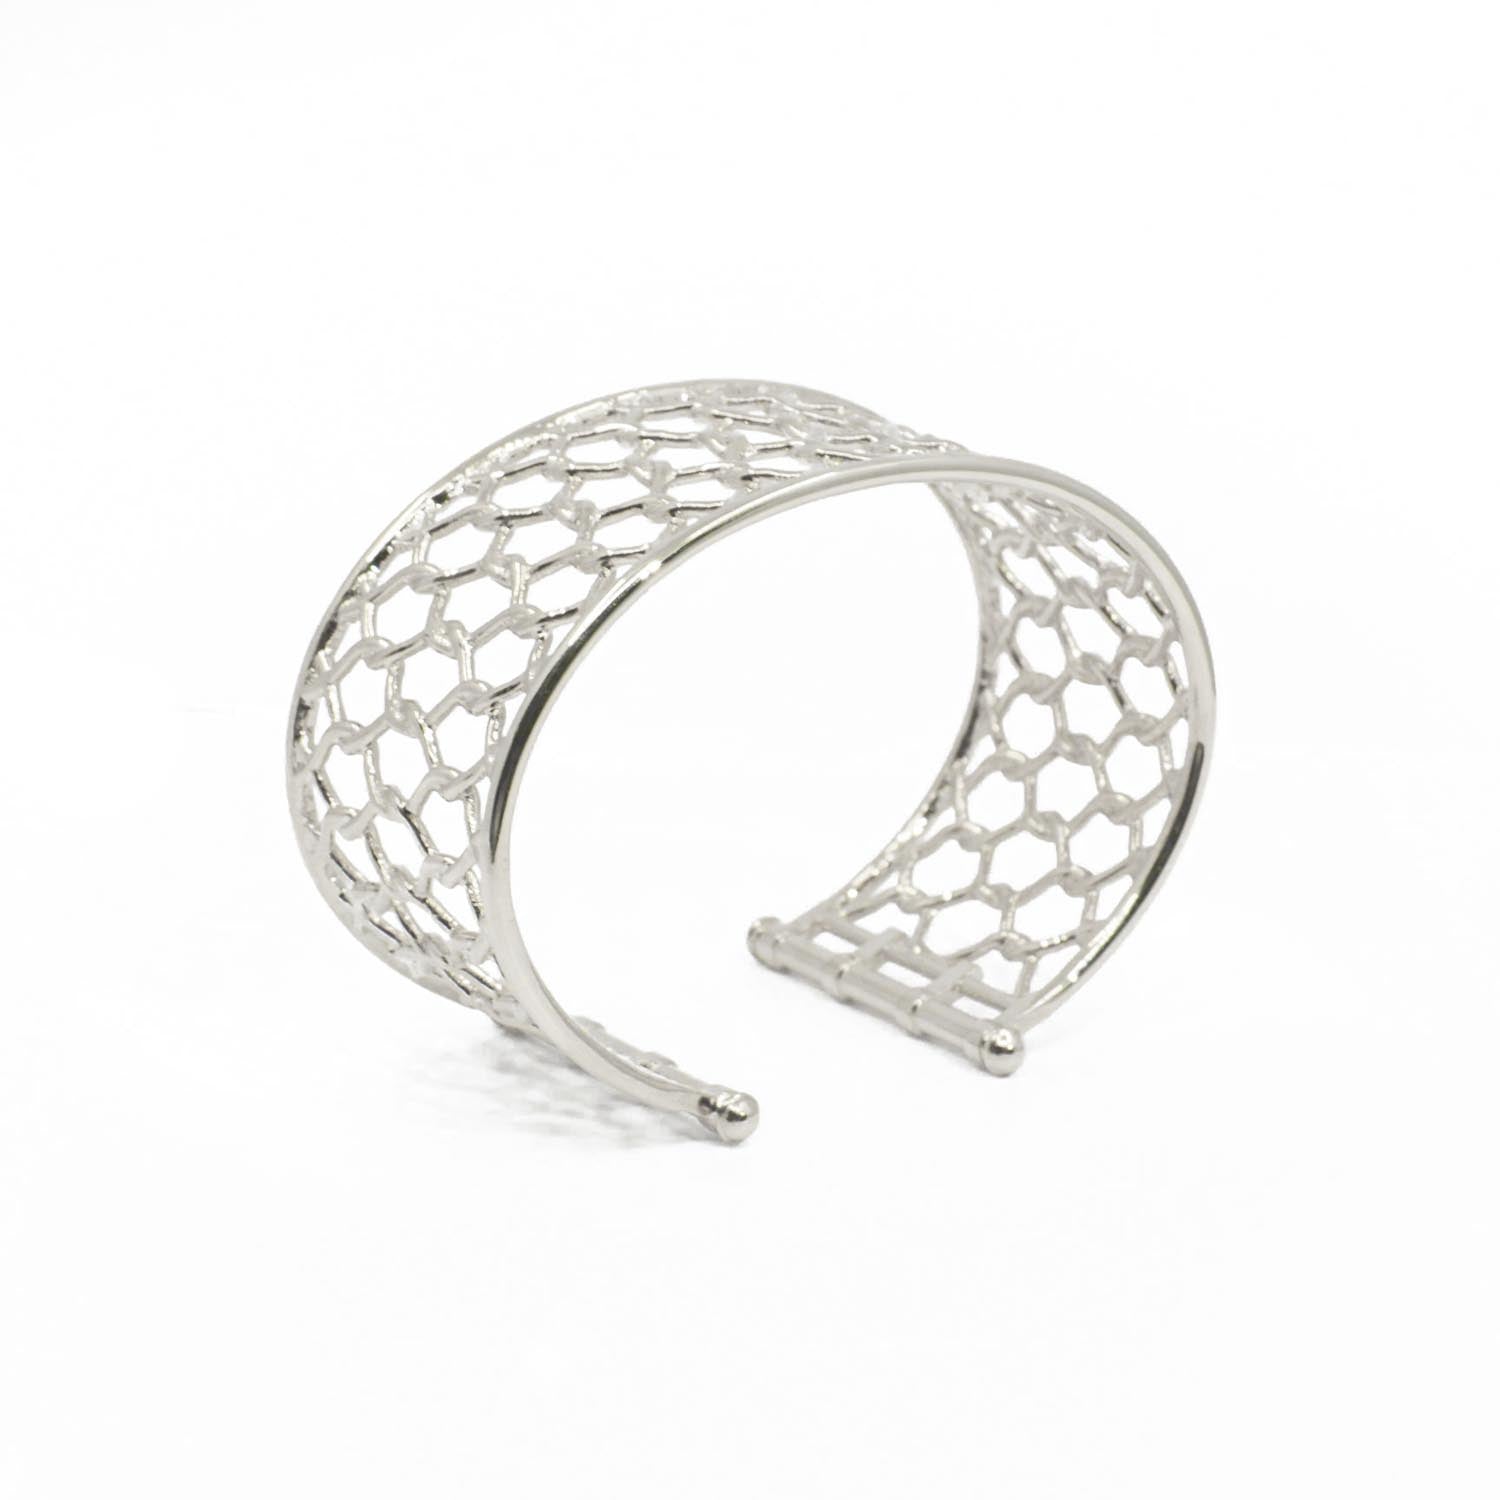 The Wide Chain Link Cuff